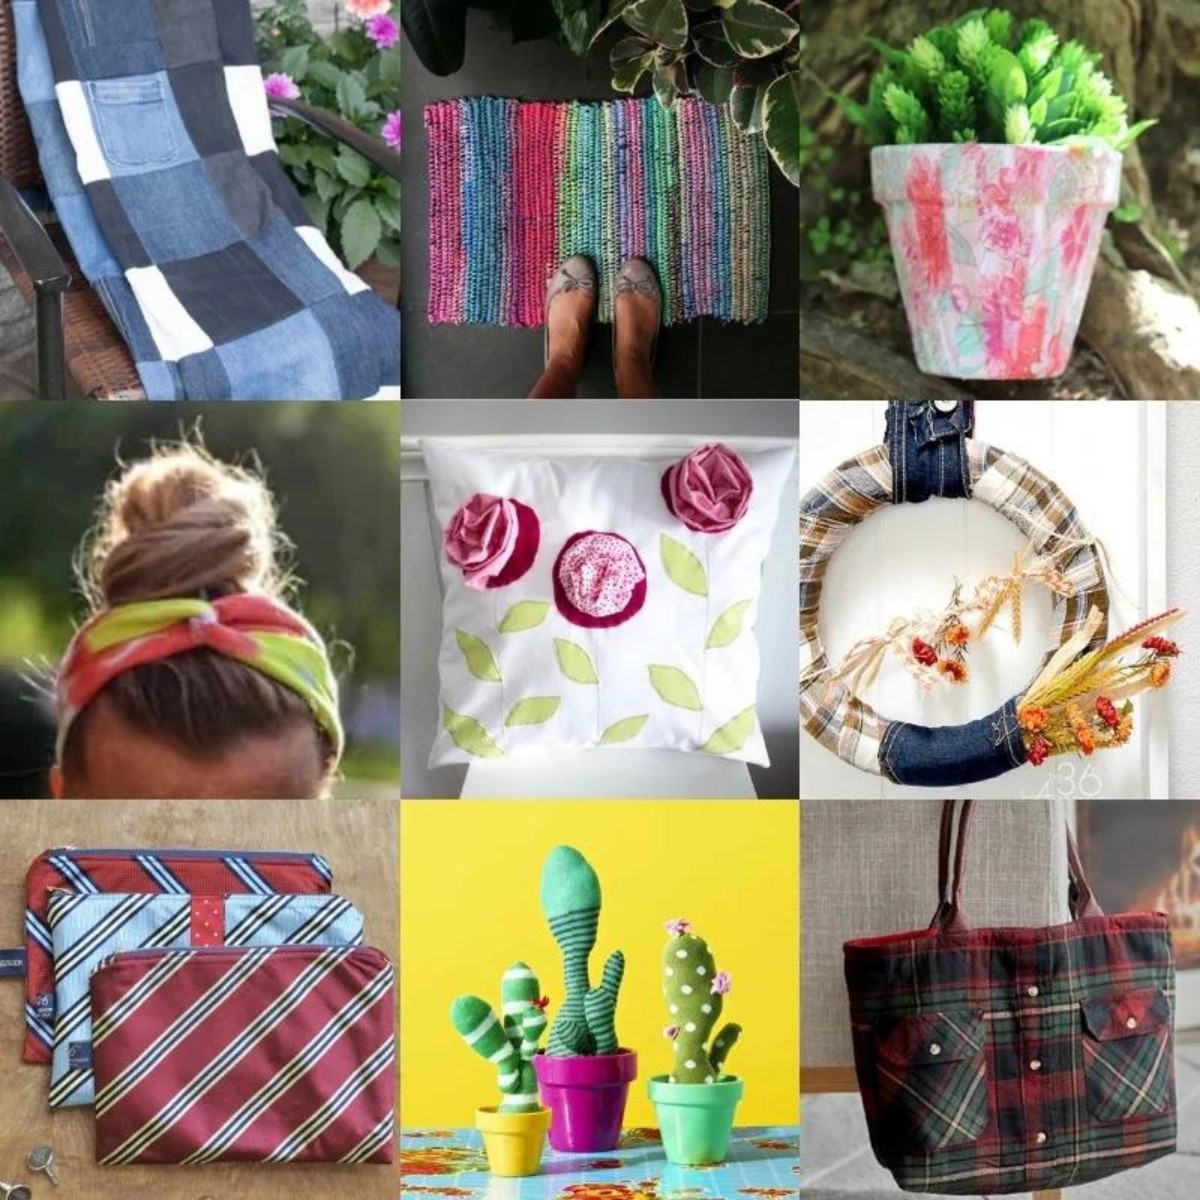 Upcycled Clothing Ideas: 30+ Ways to Reuse Old Clothes - DIY Candy